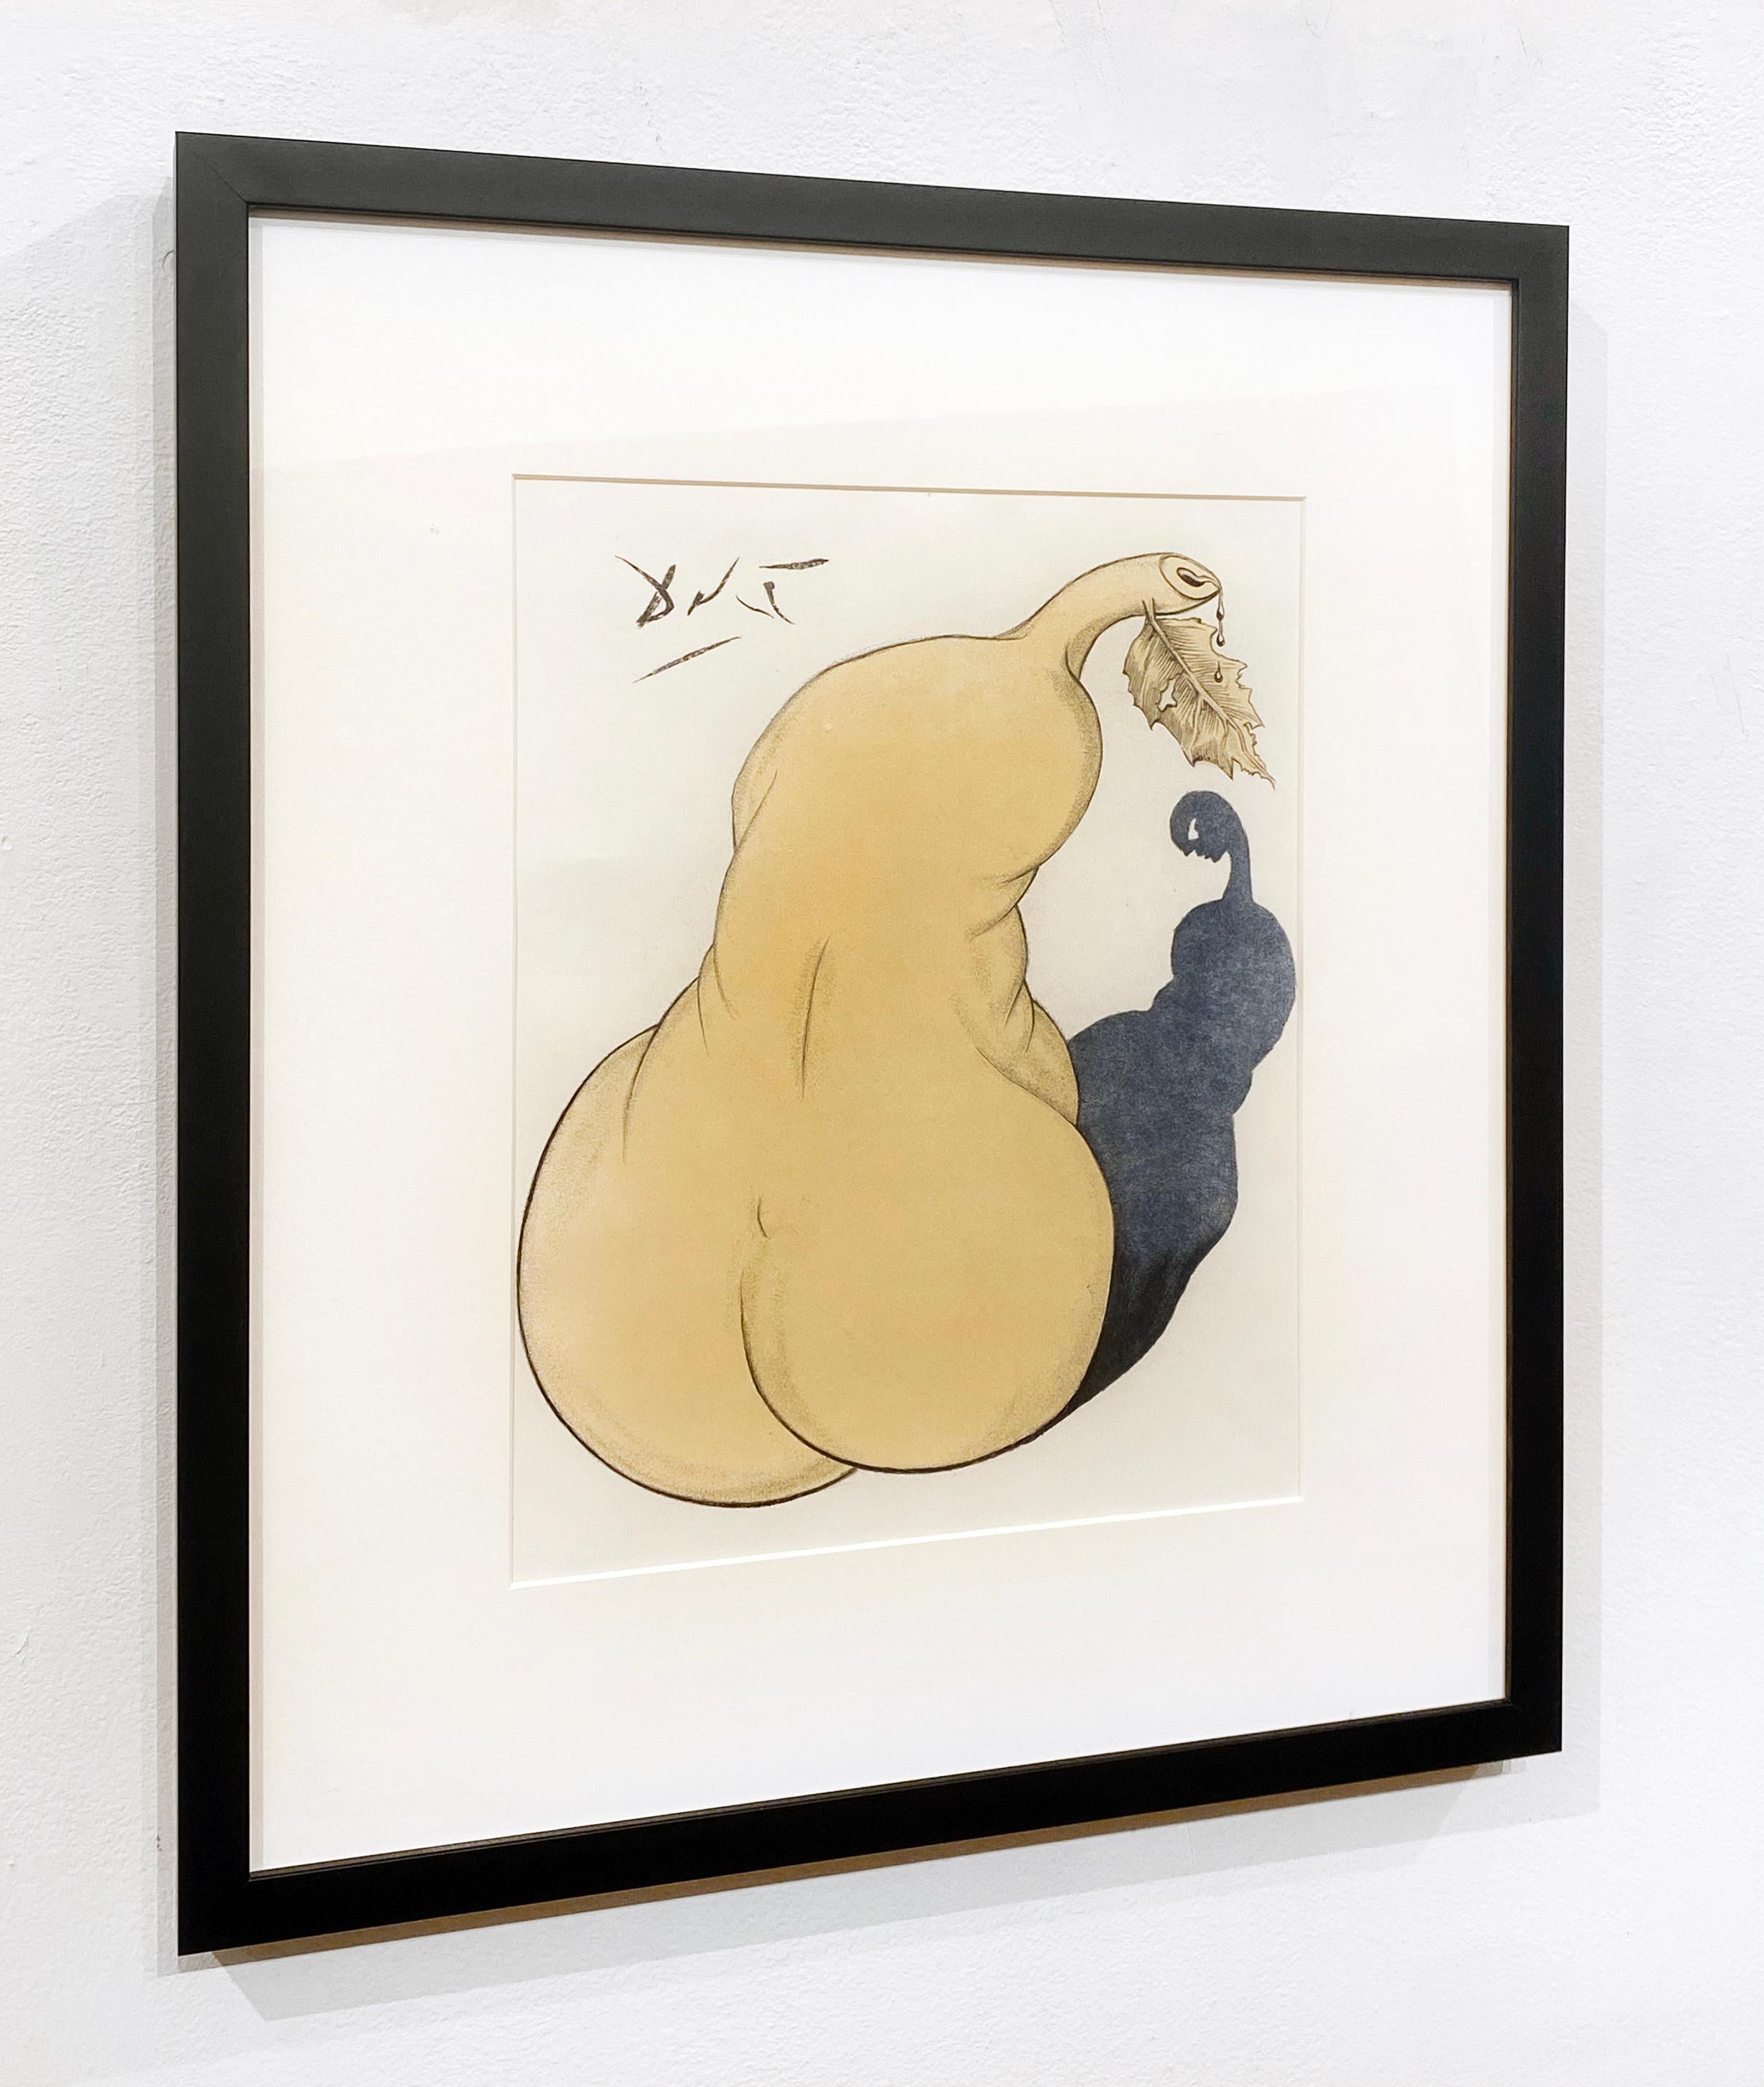 Artist:  Dali, Salvador
Title:  Pear and Nude Back
Series:  Dali Illustre Casanova
Date:  1967
Medium:  drypoint with added watercolor
Framed Dimensions:  21.5